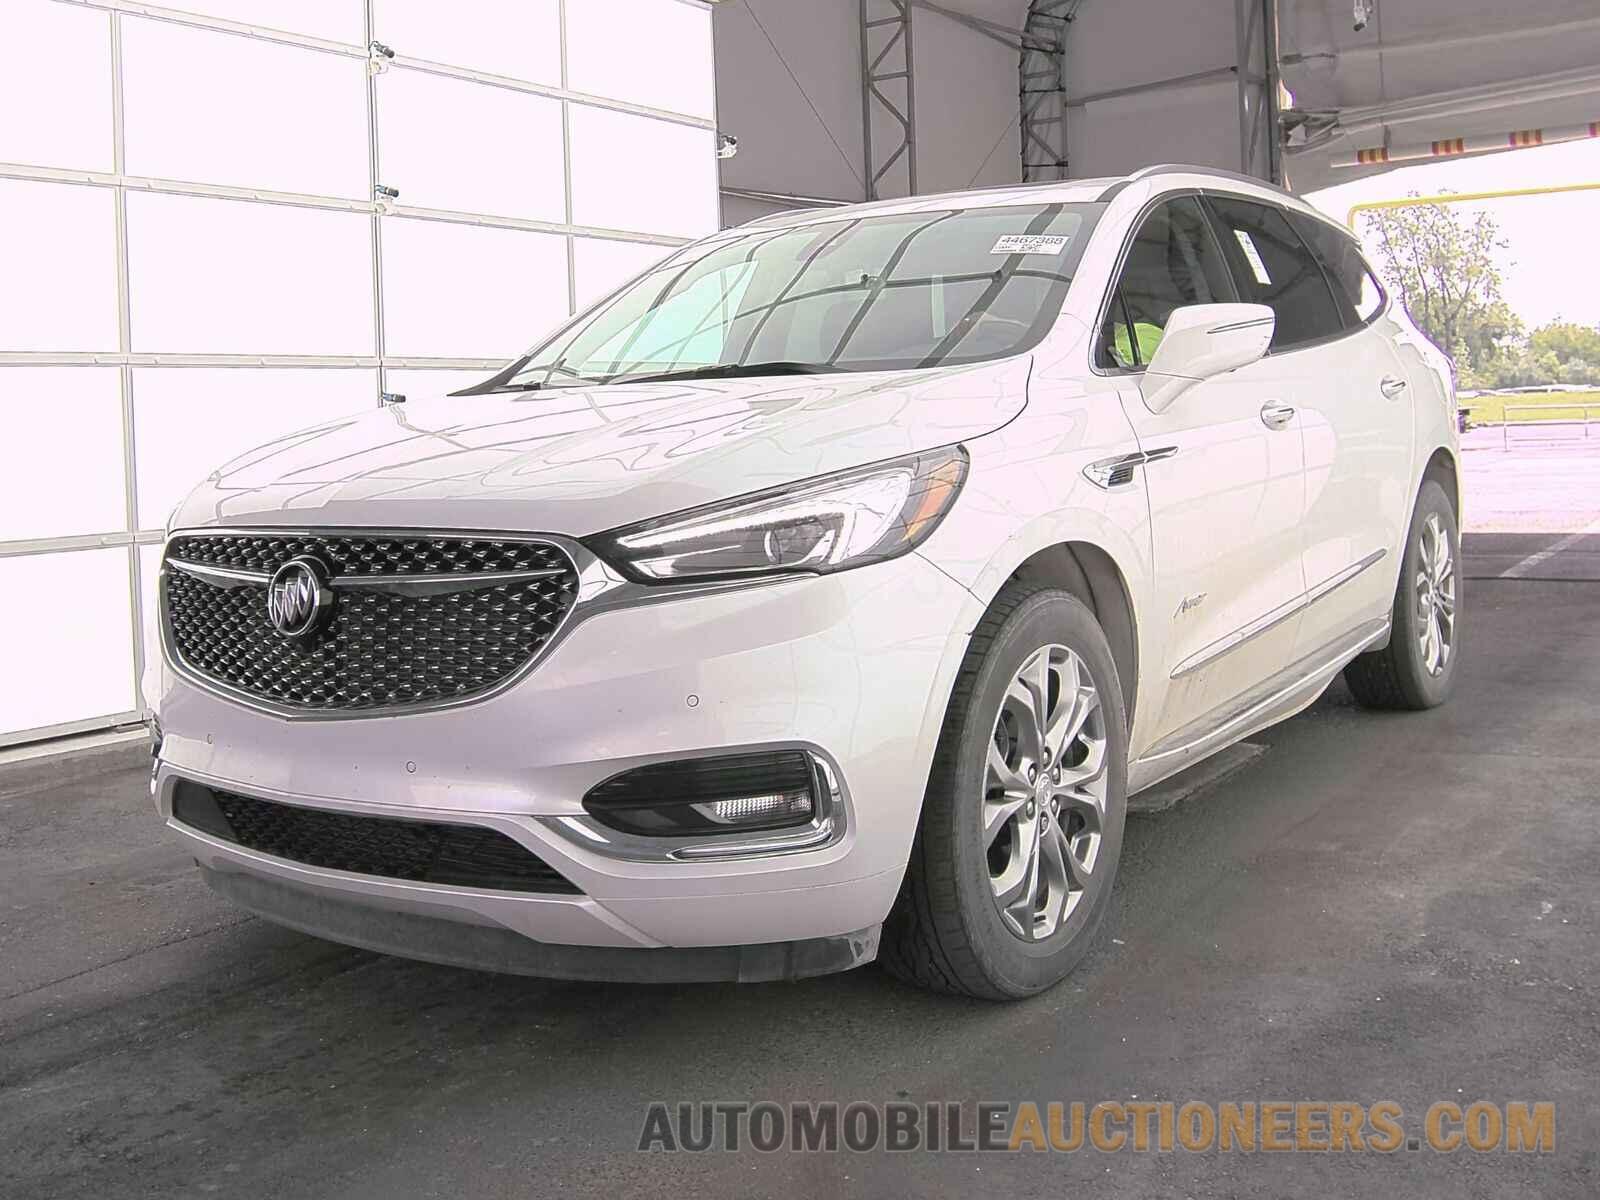 5GAEVCKW1MJ185056 Buick Enclave 2021